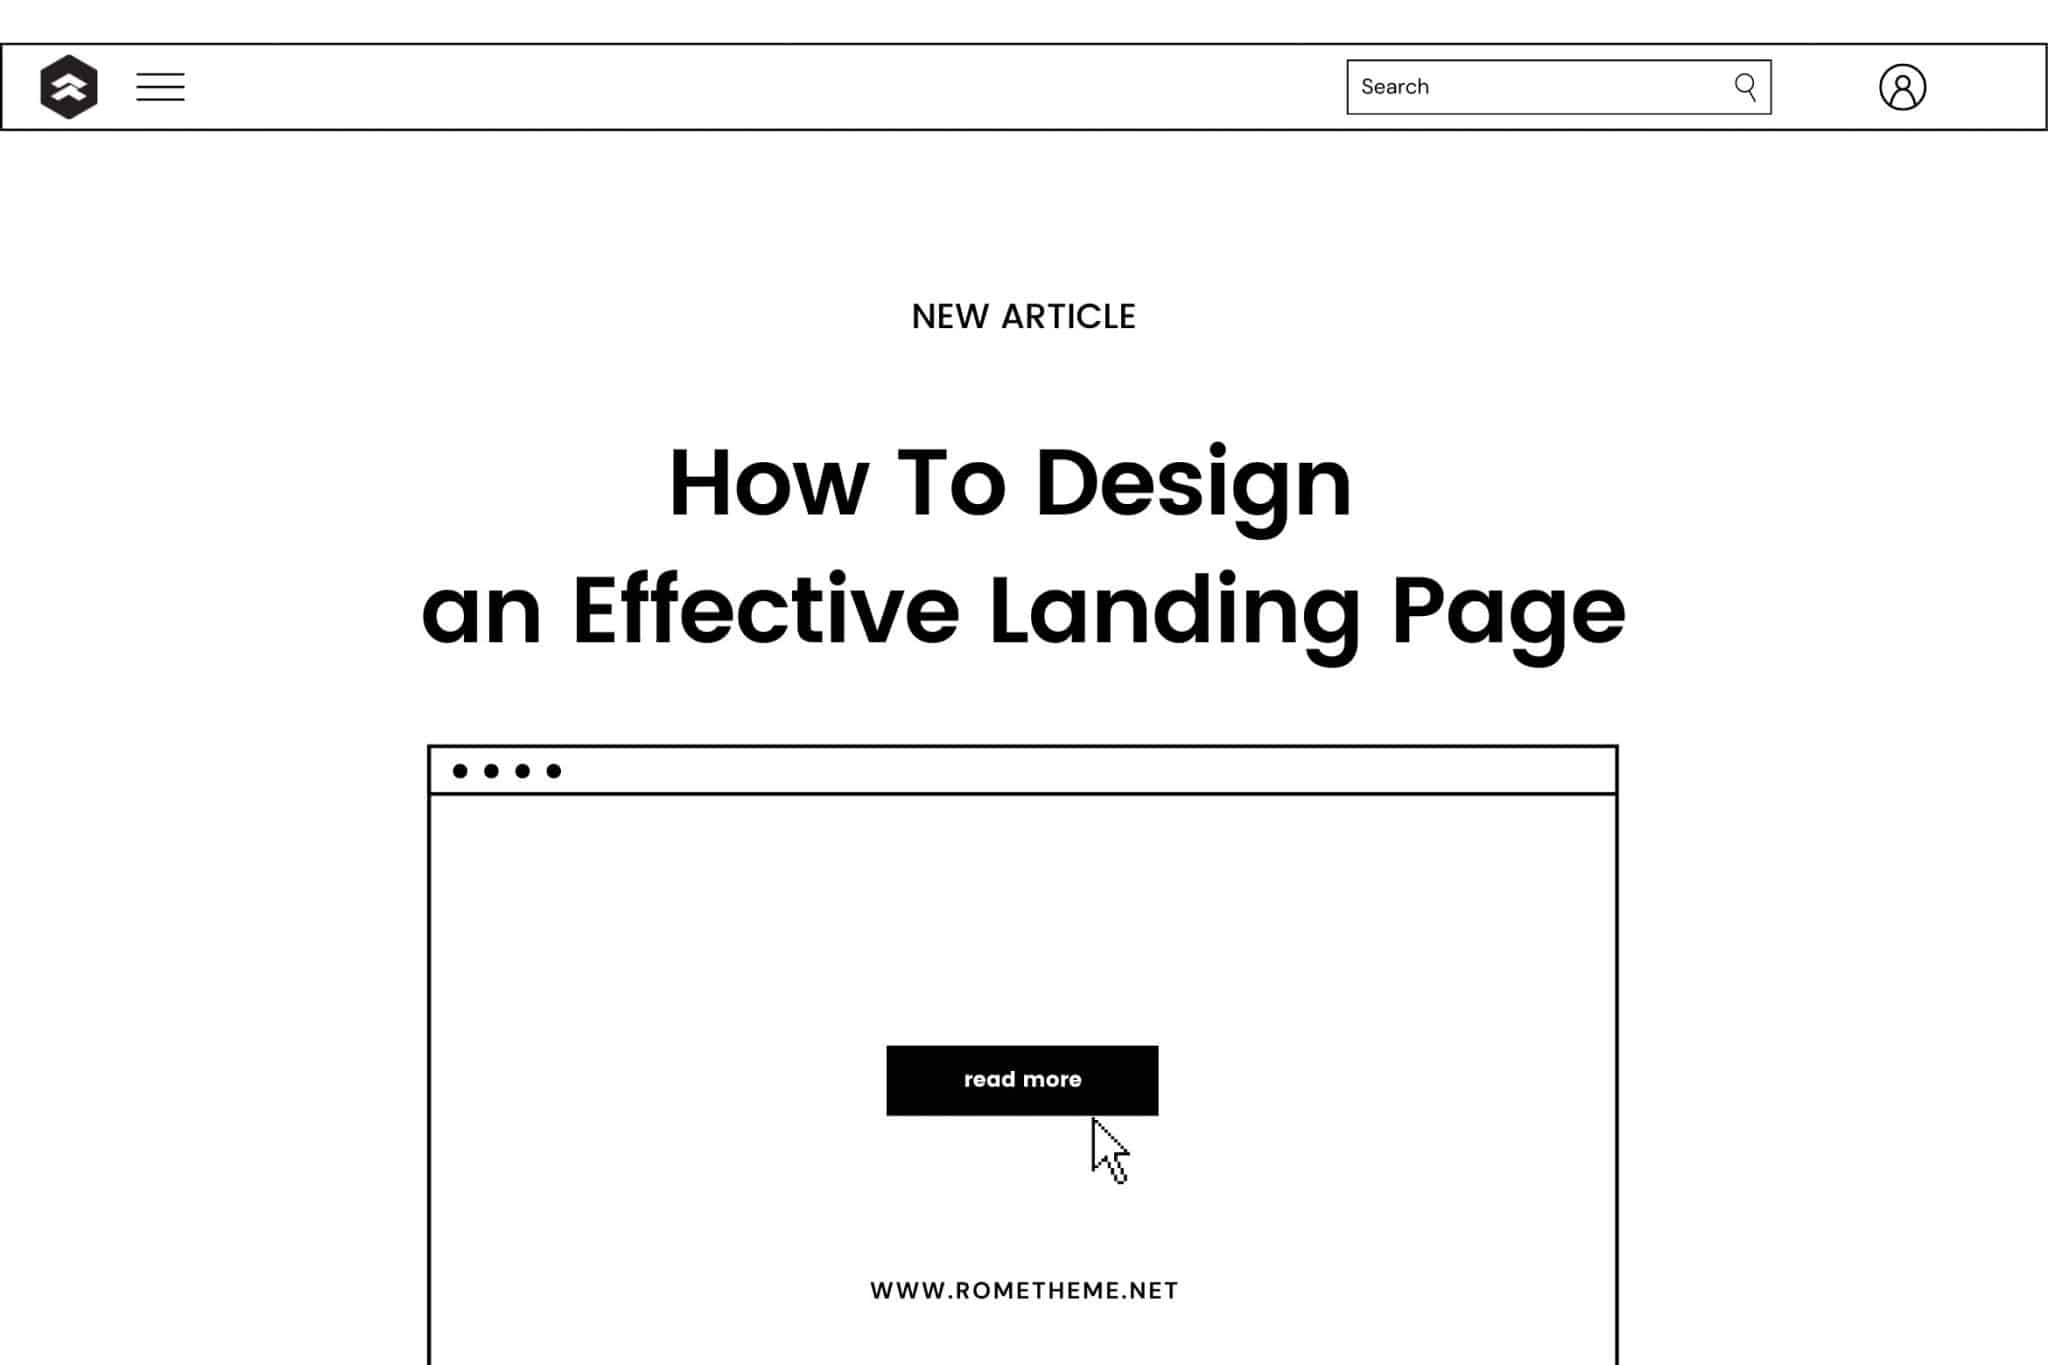 how-to-design-an-effective-landing-page-rometheme